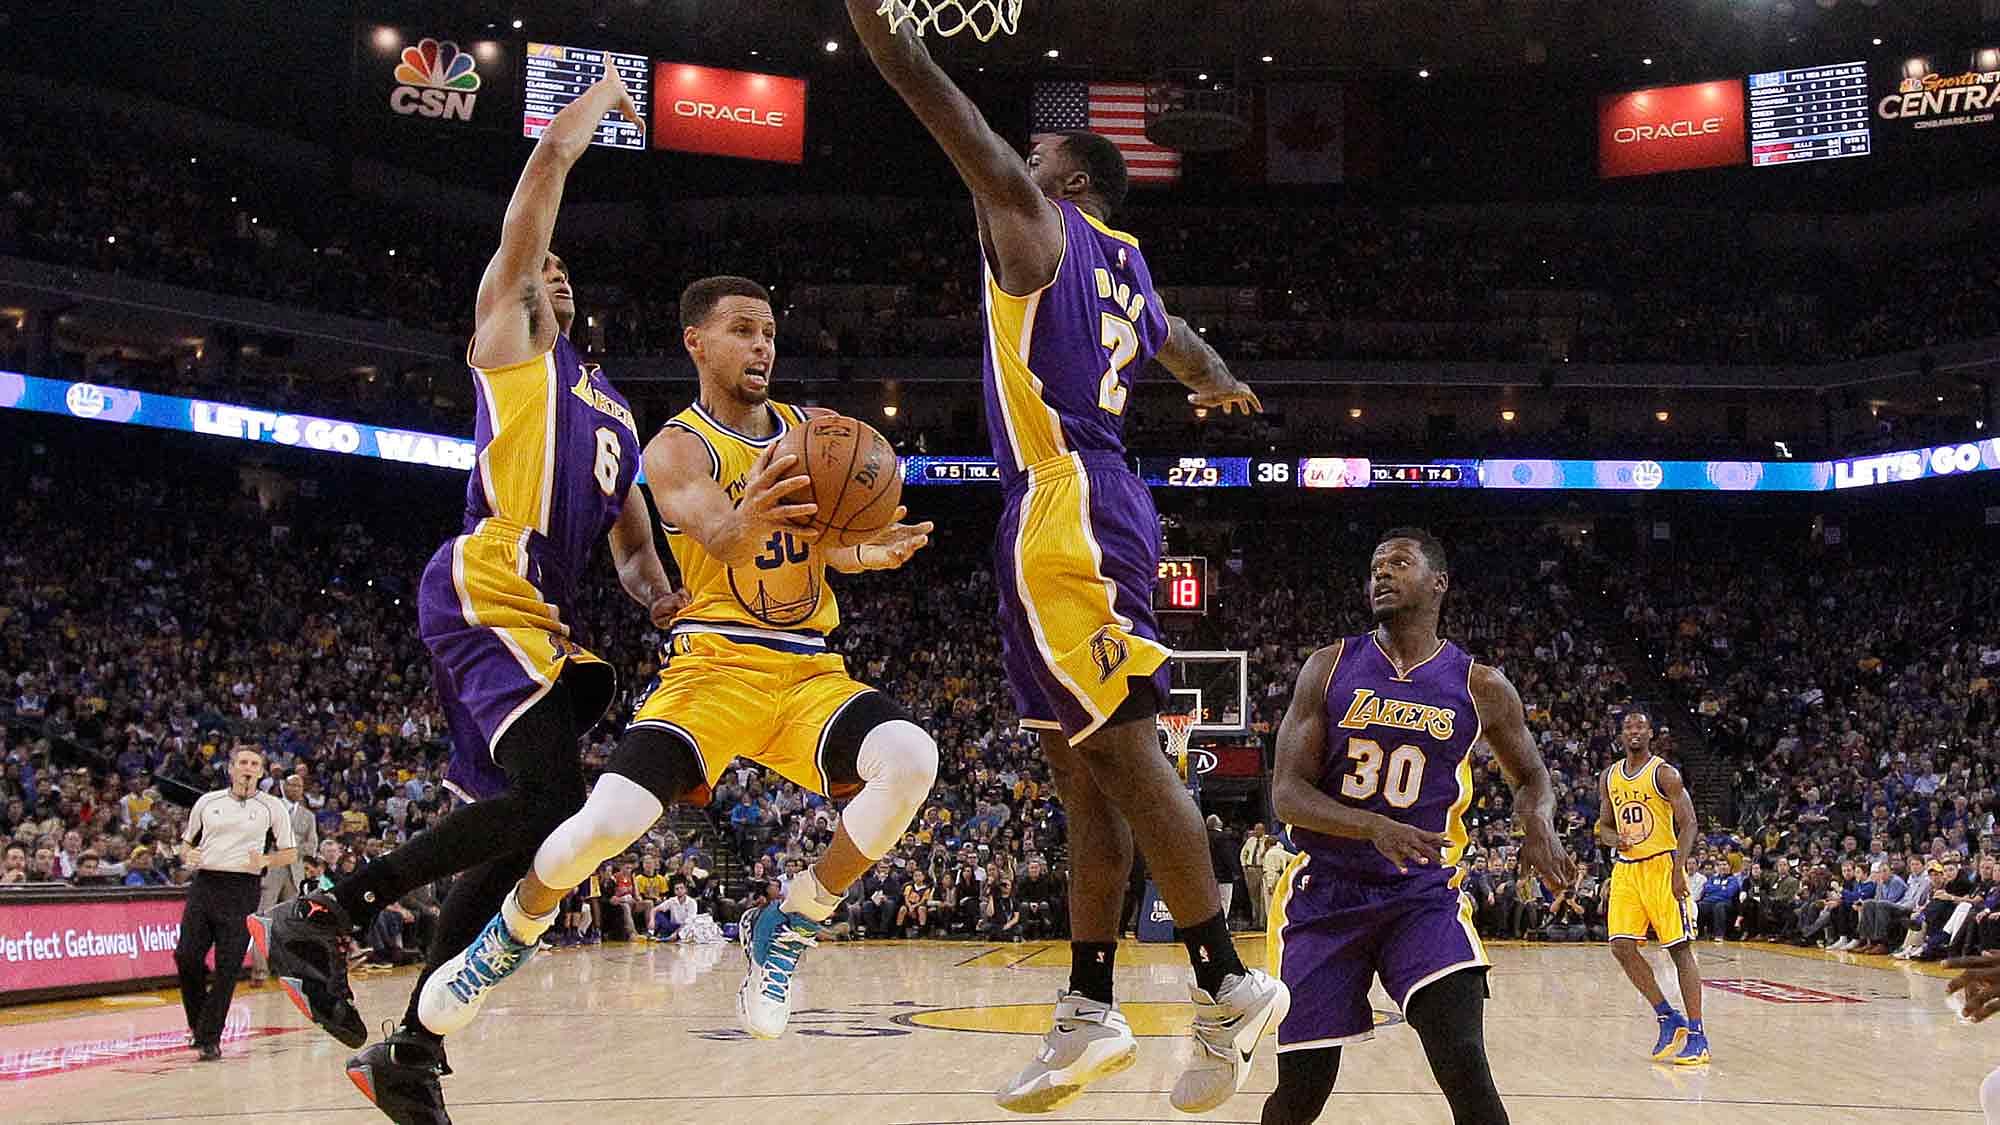 <a></a>Golden State Warriors guard Stephen Curry, center, looks to pass as Los Angeles Lakers guard Jordan Clarkson (6), forward Brandon Bass (2) and forward Julius Randle (30) defend during the first half of the game. (Photo: AP)